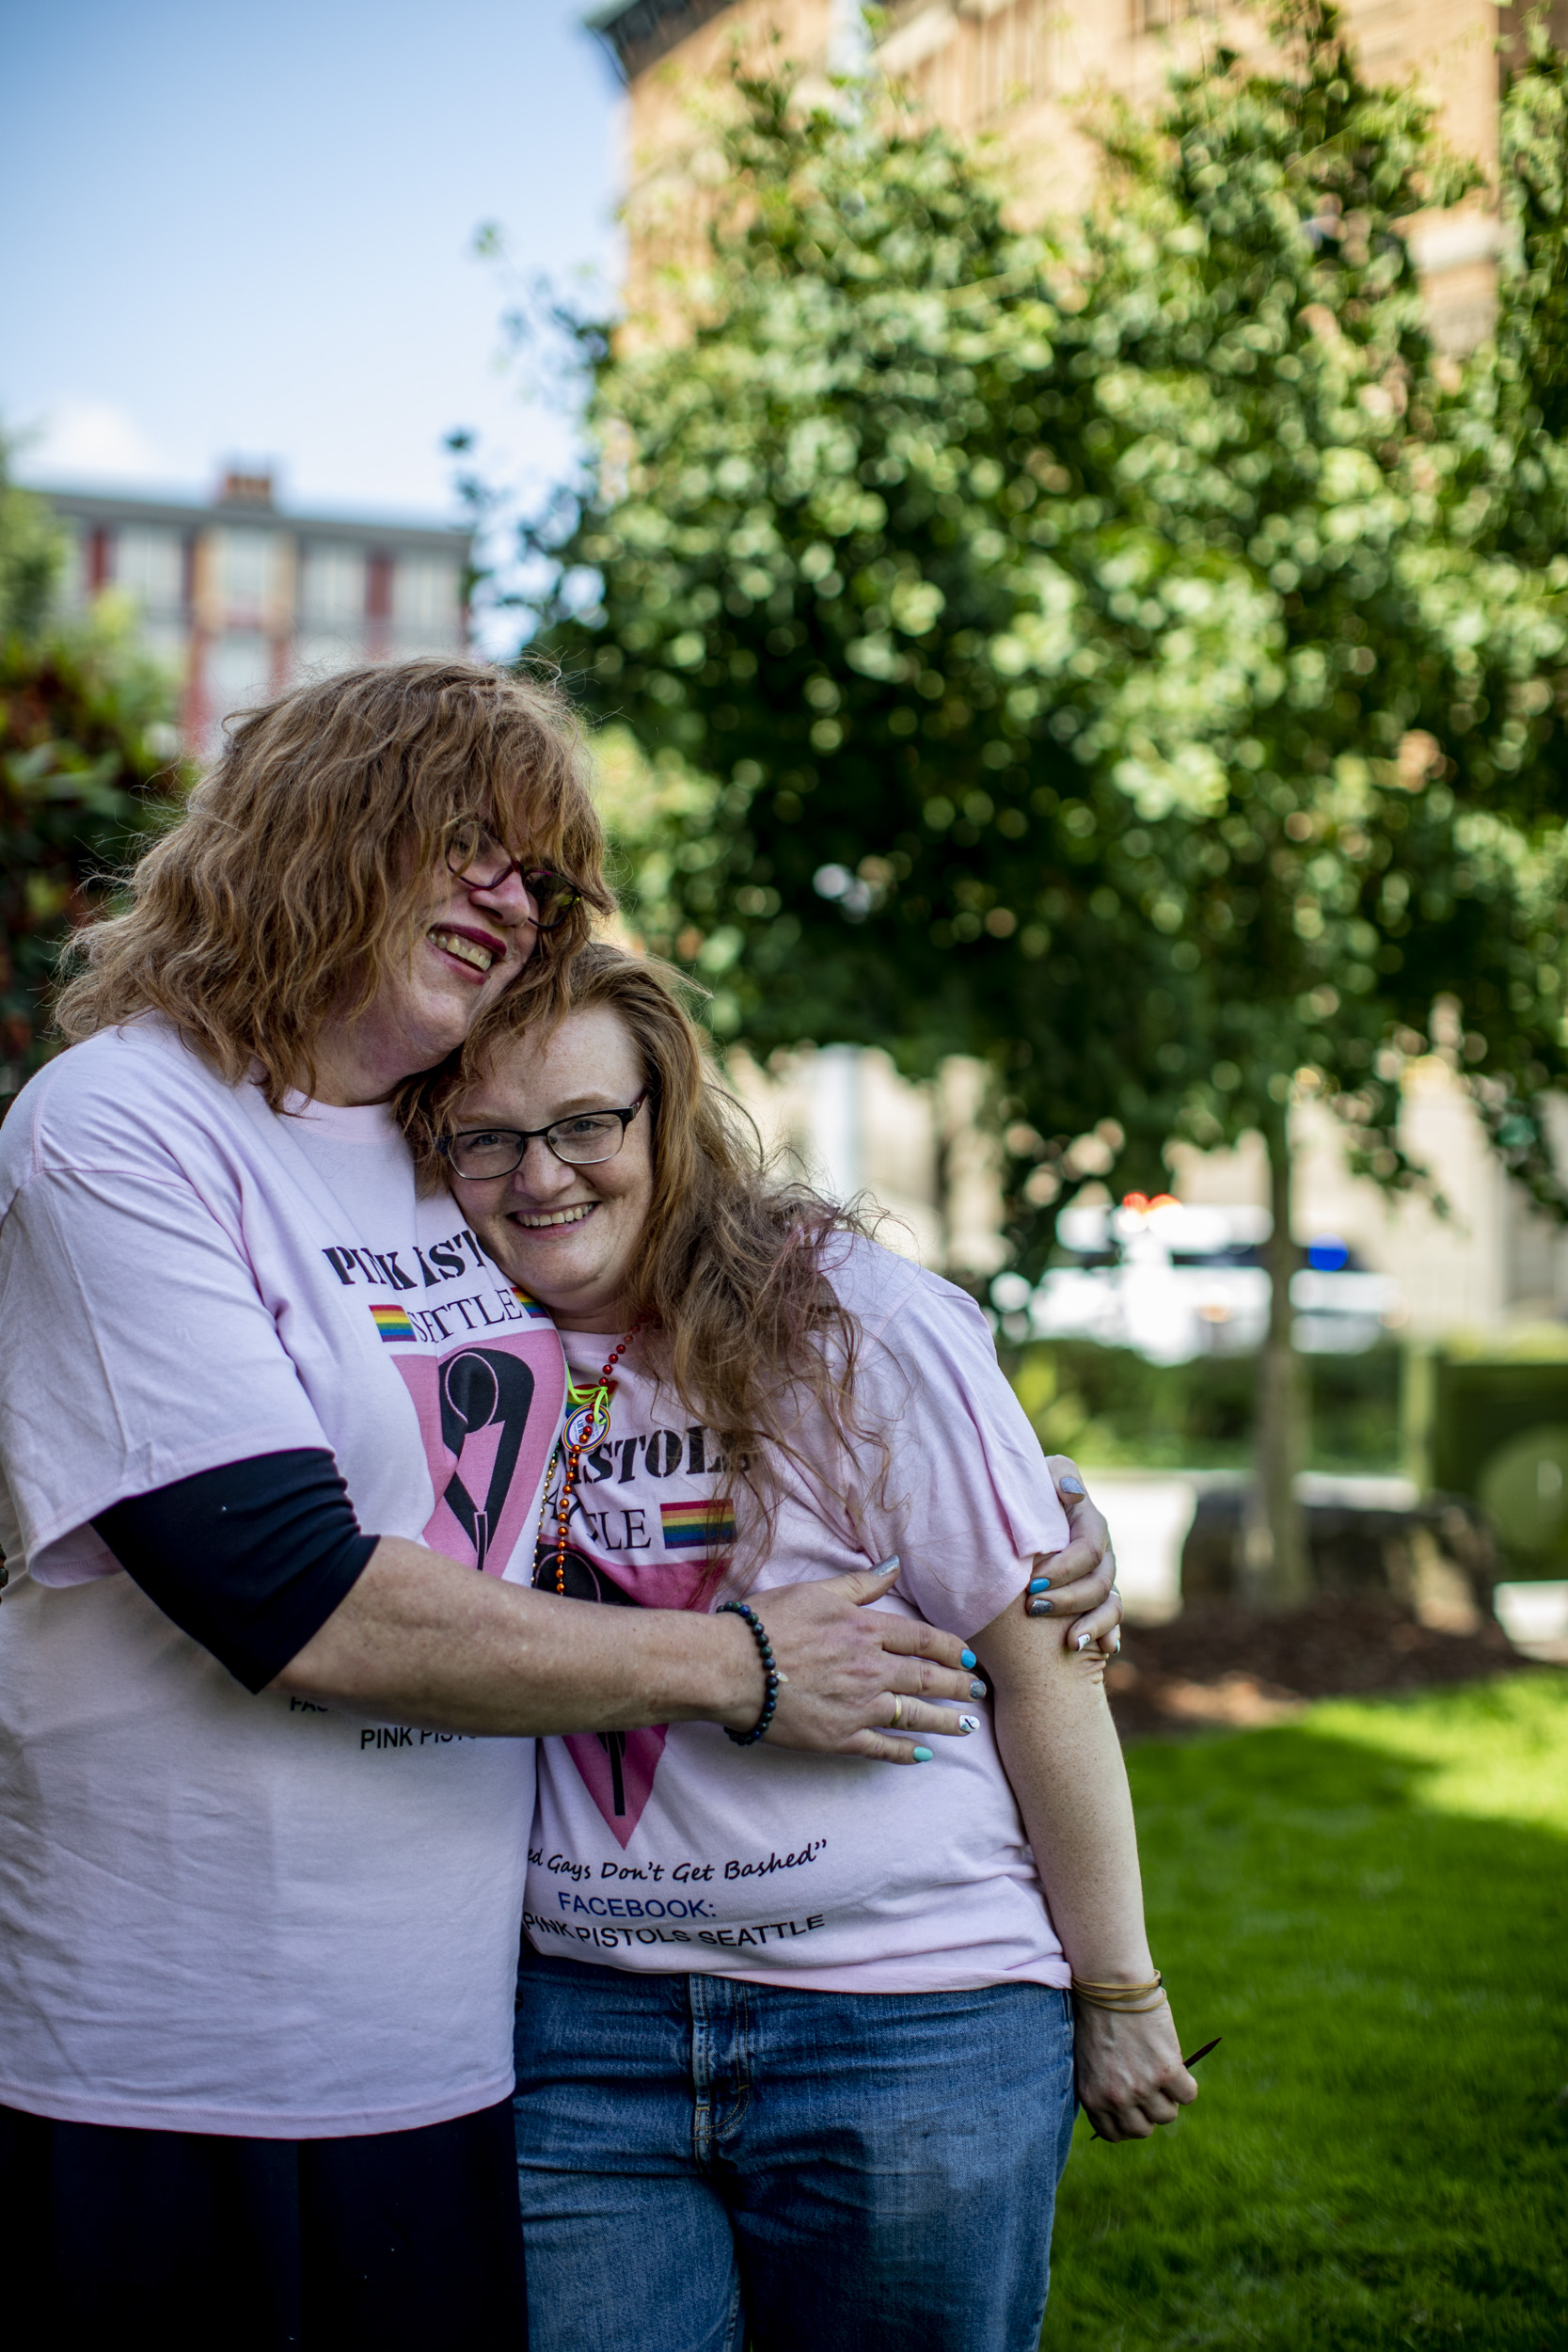 Pink Pistols administrator Margaret Rhoades, left, and her partner Susan YoungCrane at Tacoma Pride on July 13, 2019. The couple started coming to meetups two years ago. They like the inclusiveness and the focus on gun education. “It’s a safe place,” Rhoades says. “There’s not a lot of judgment that goes on.”